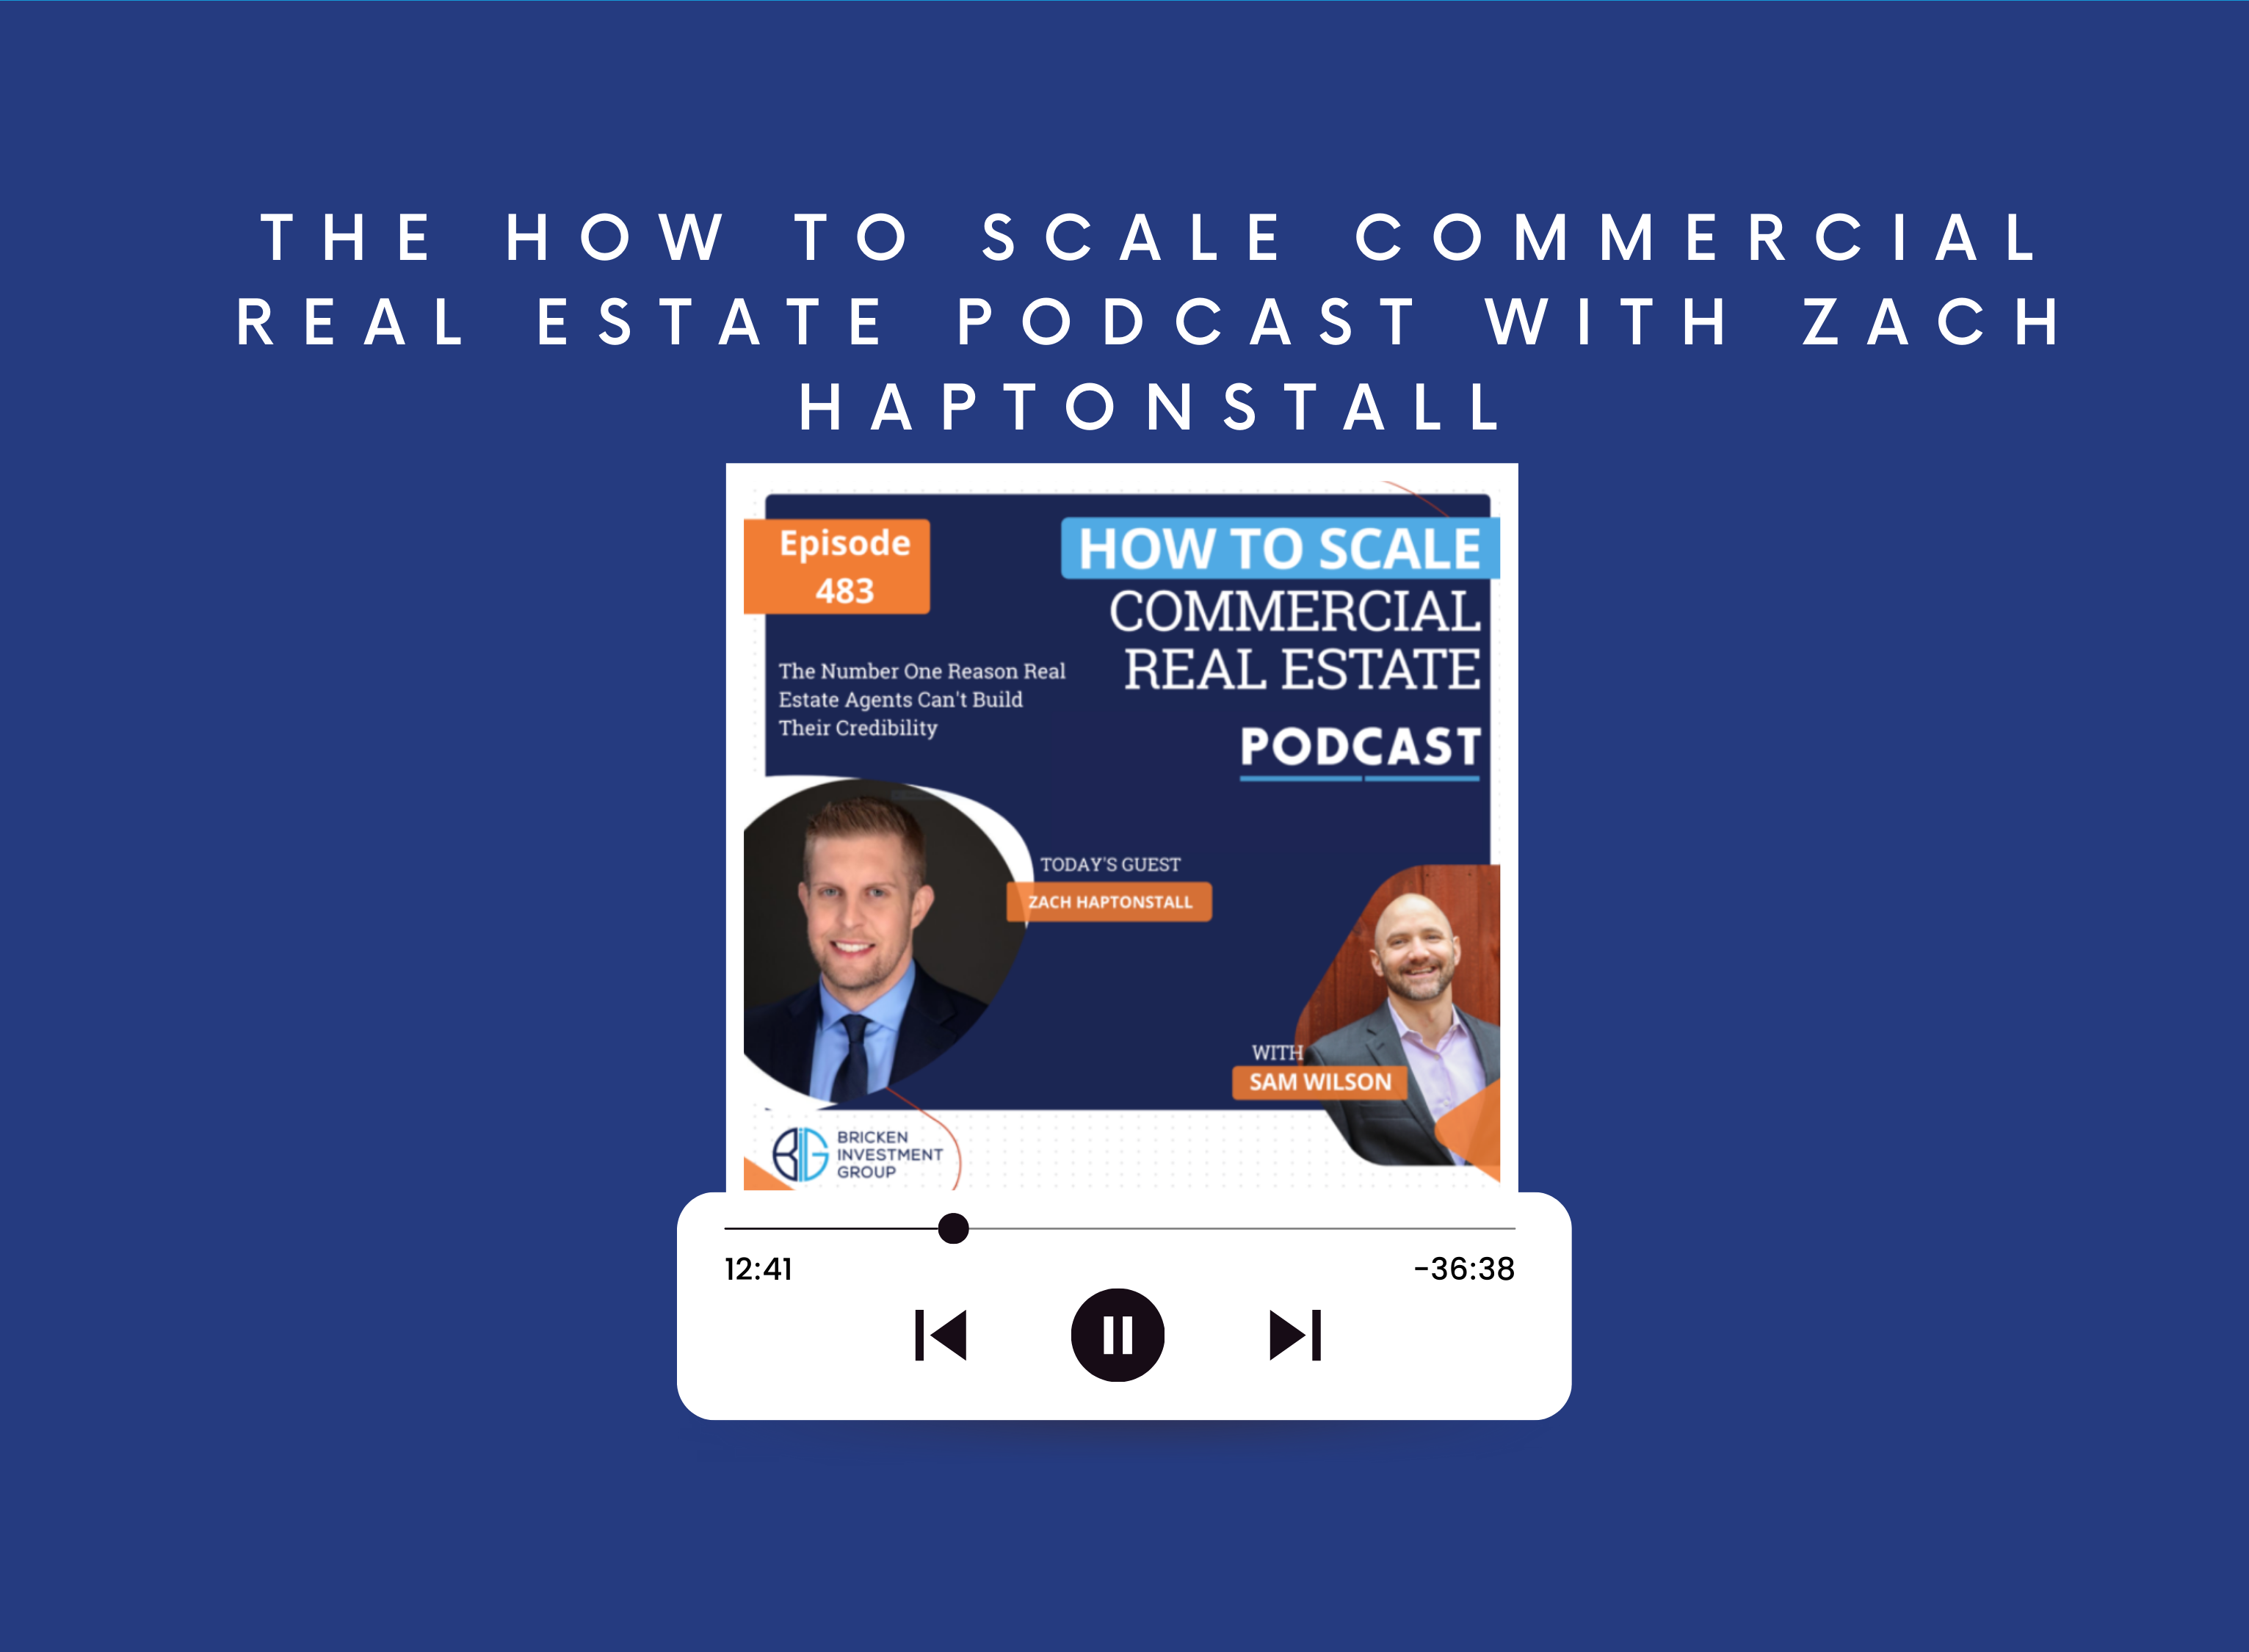 The How to Scale Commercial Real Estate Podcast